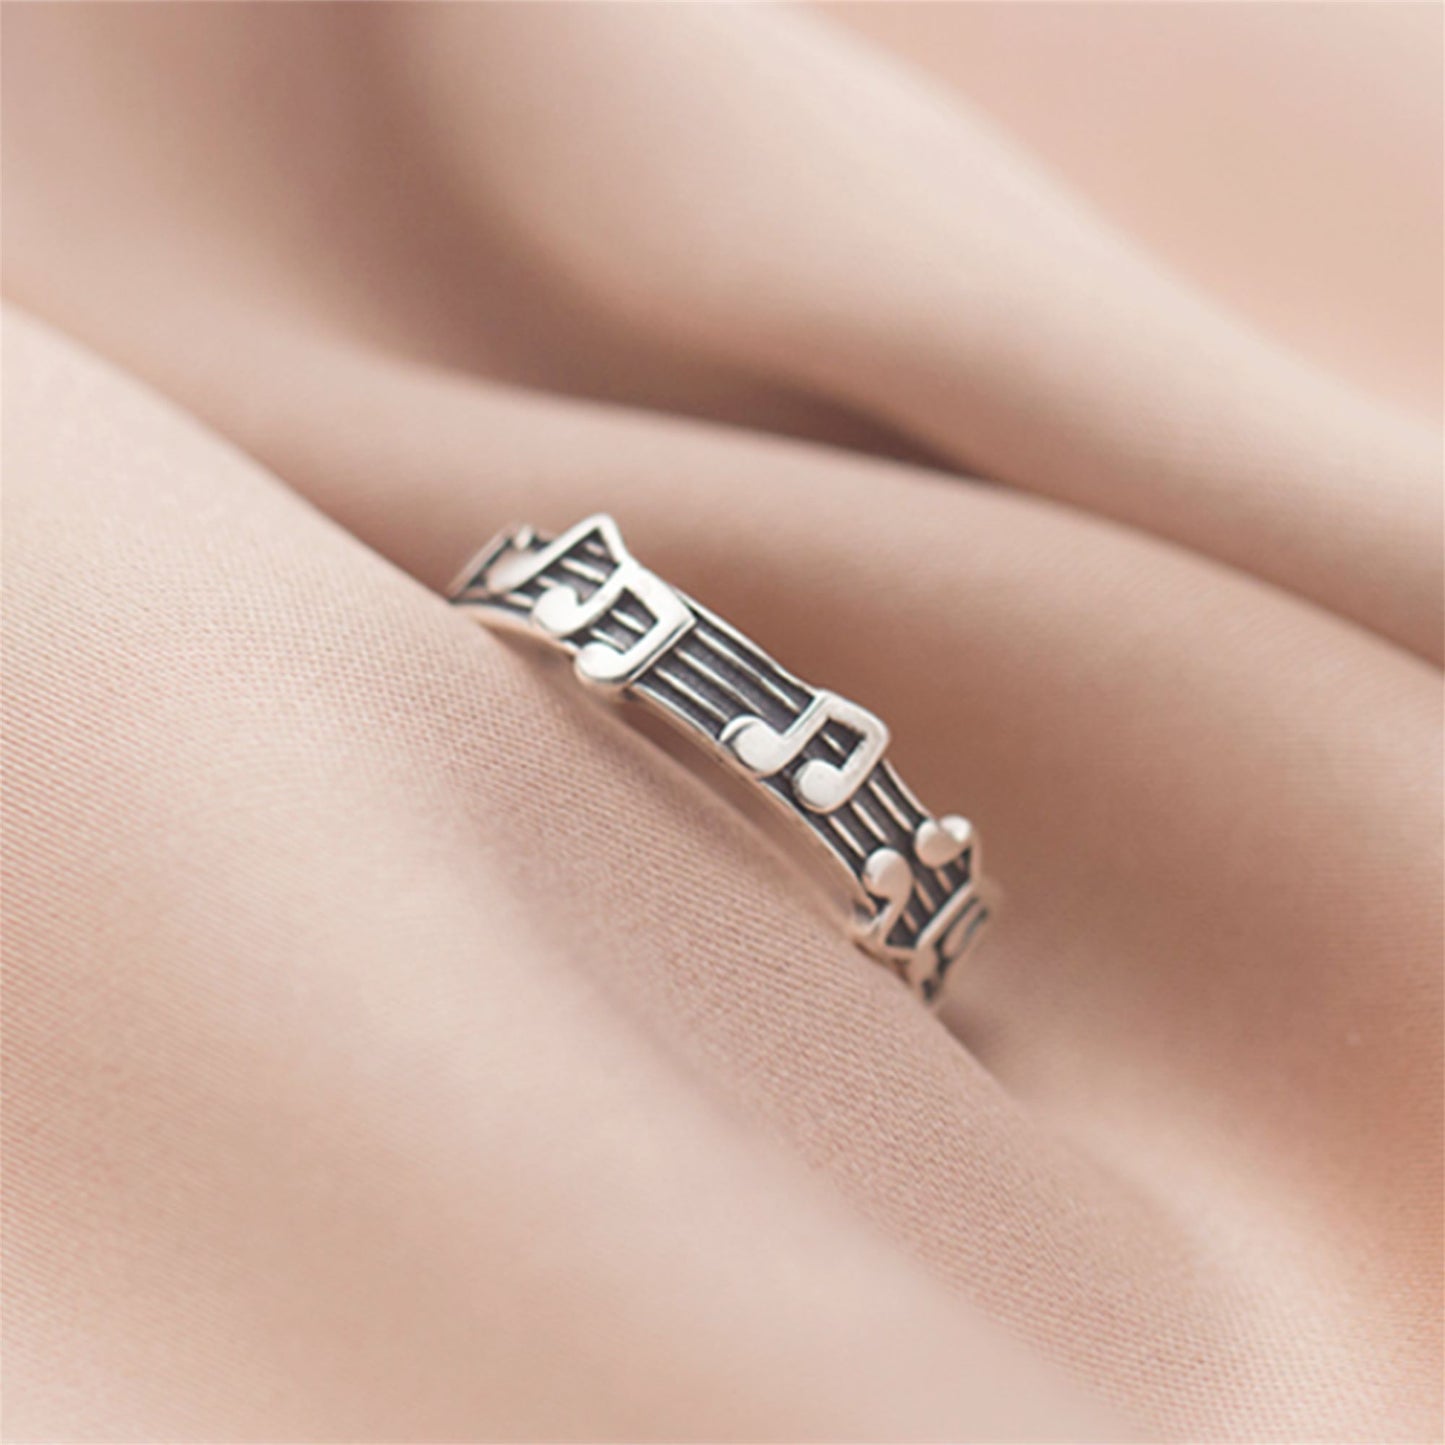 925 Sterling Silver Oxidized Musical Note Ring with Open Band - sugarkittenlondon